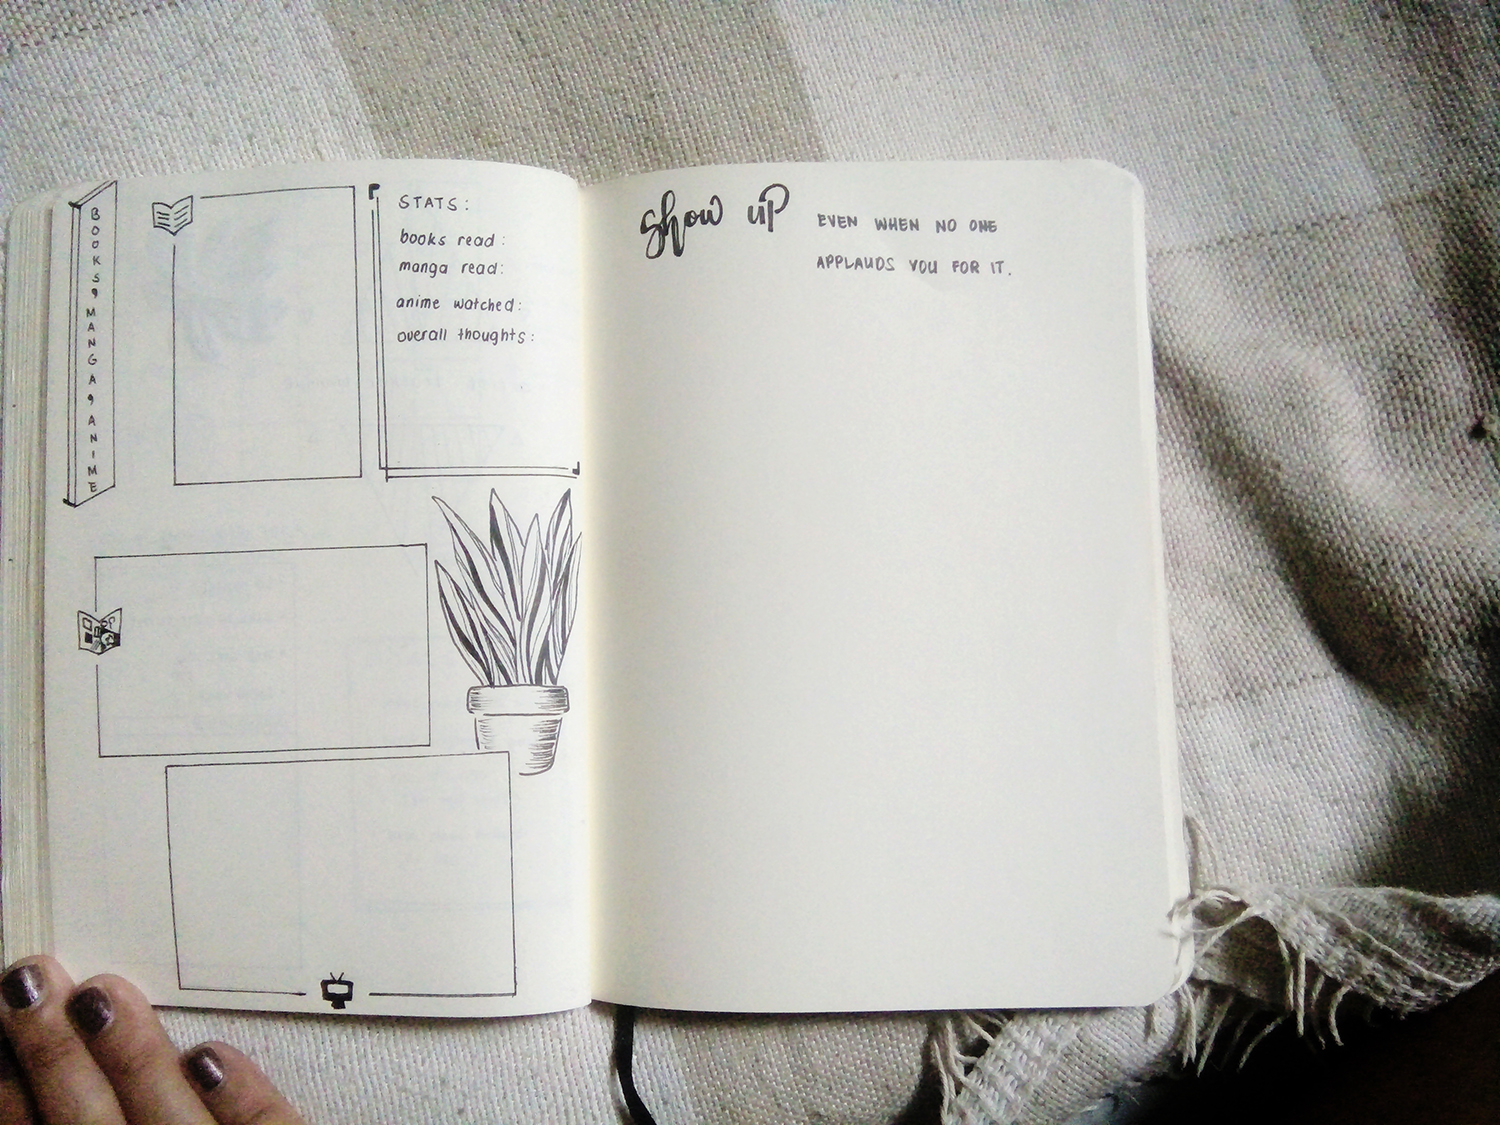 Picture of my bullet journal's books, manga and anime page and a quote on the next page, "Show up even when no one applauds you for it."